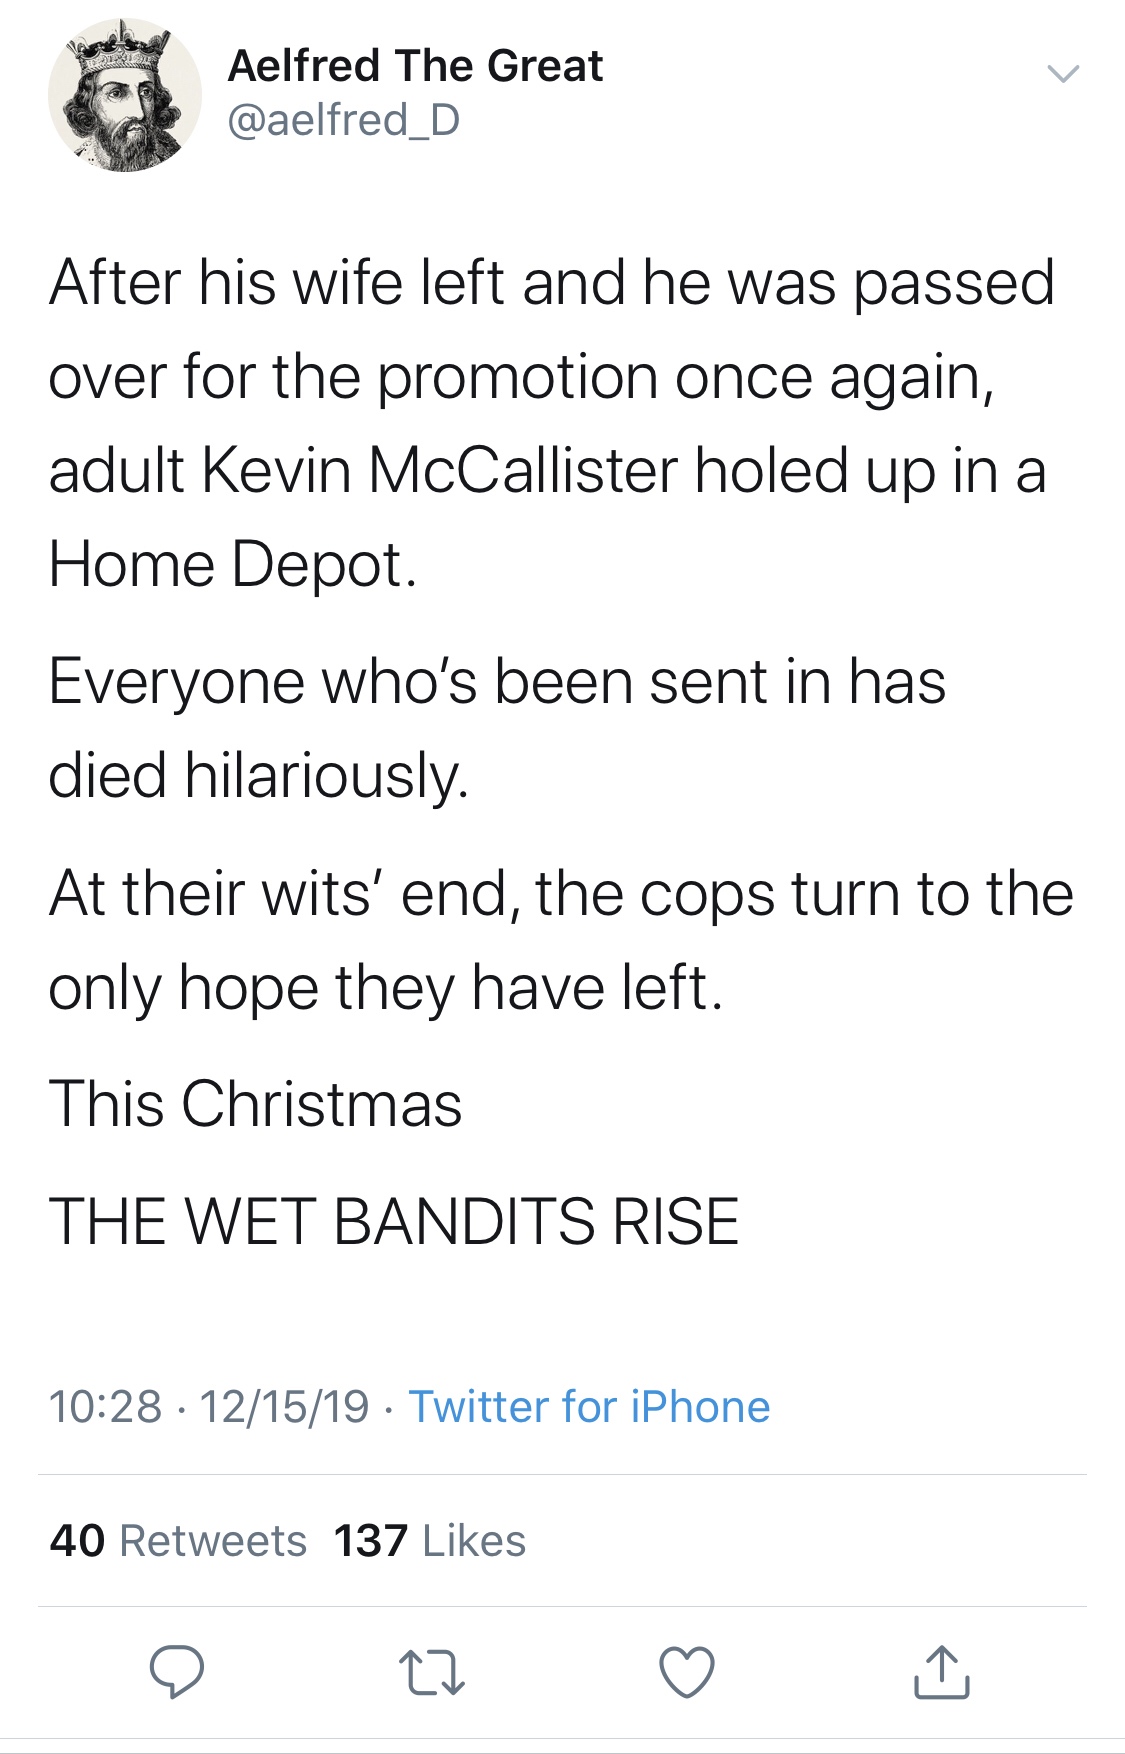 angle - Aelfred The Great After his wife left and he was passed over for the promotion once again, adult Kevin McCallister holed up in a Home Depot. Everyone who's been sent in has died hilariously. At their wits' end, the cops turn to the only hope they 